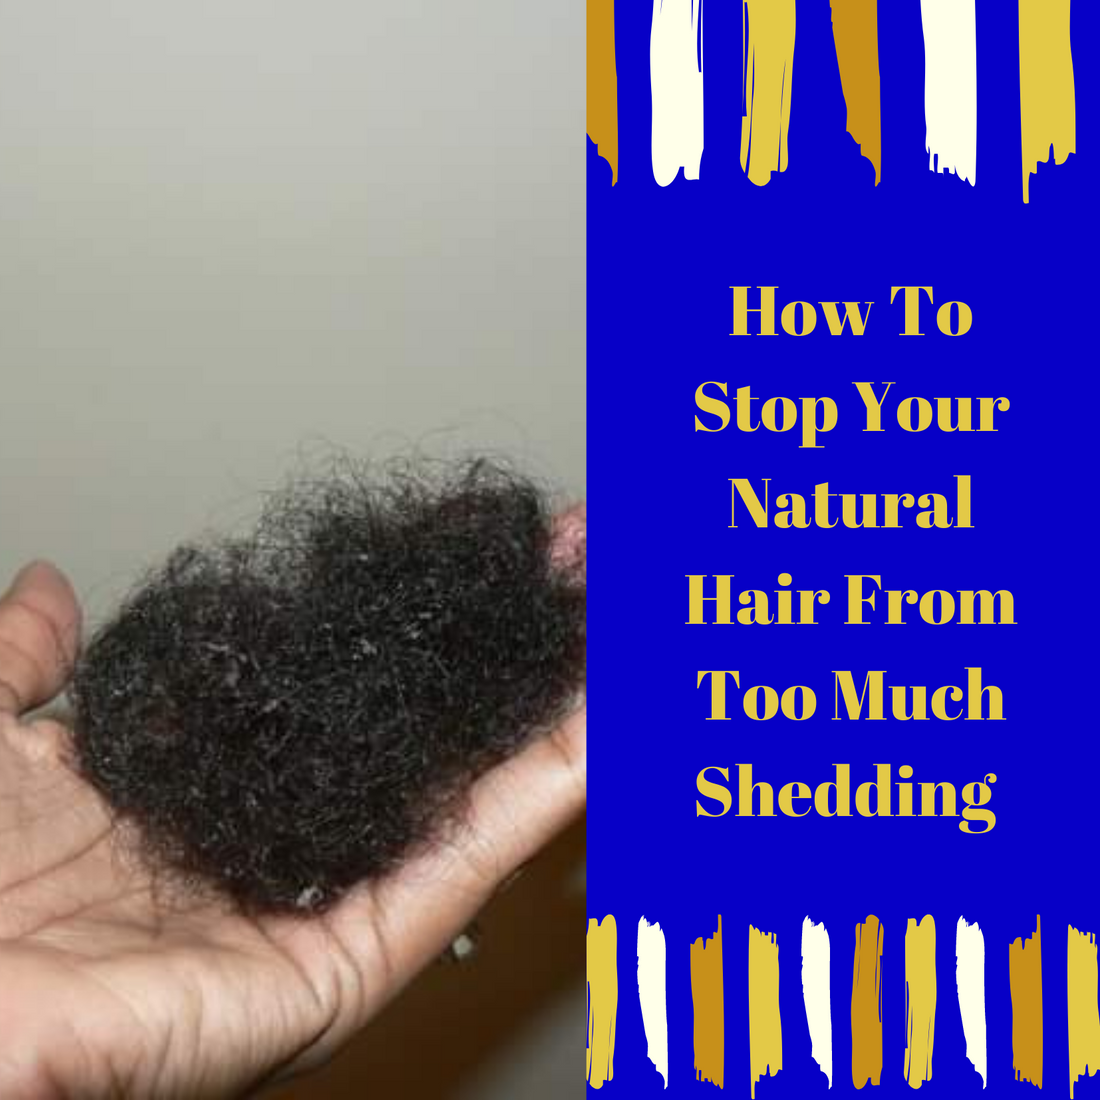 HOW TO STOP NATURAL HAIR FROM TOO MUCH SHEDDING